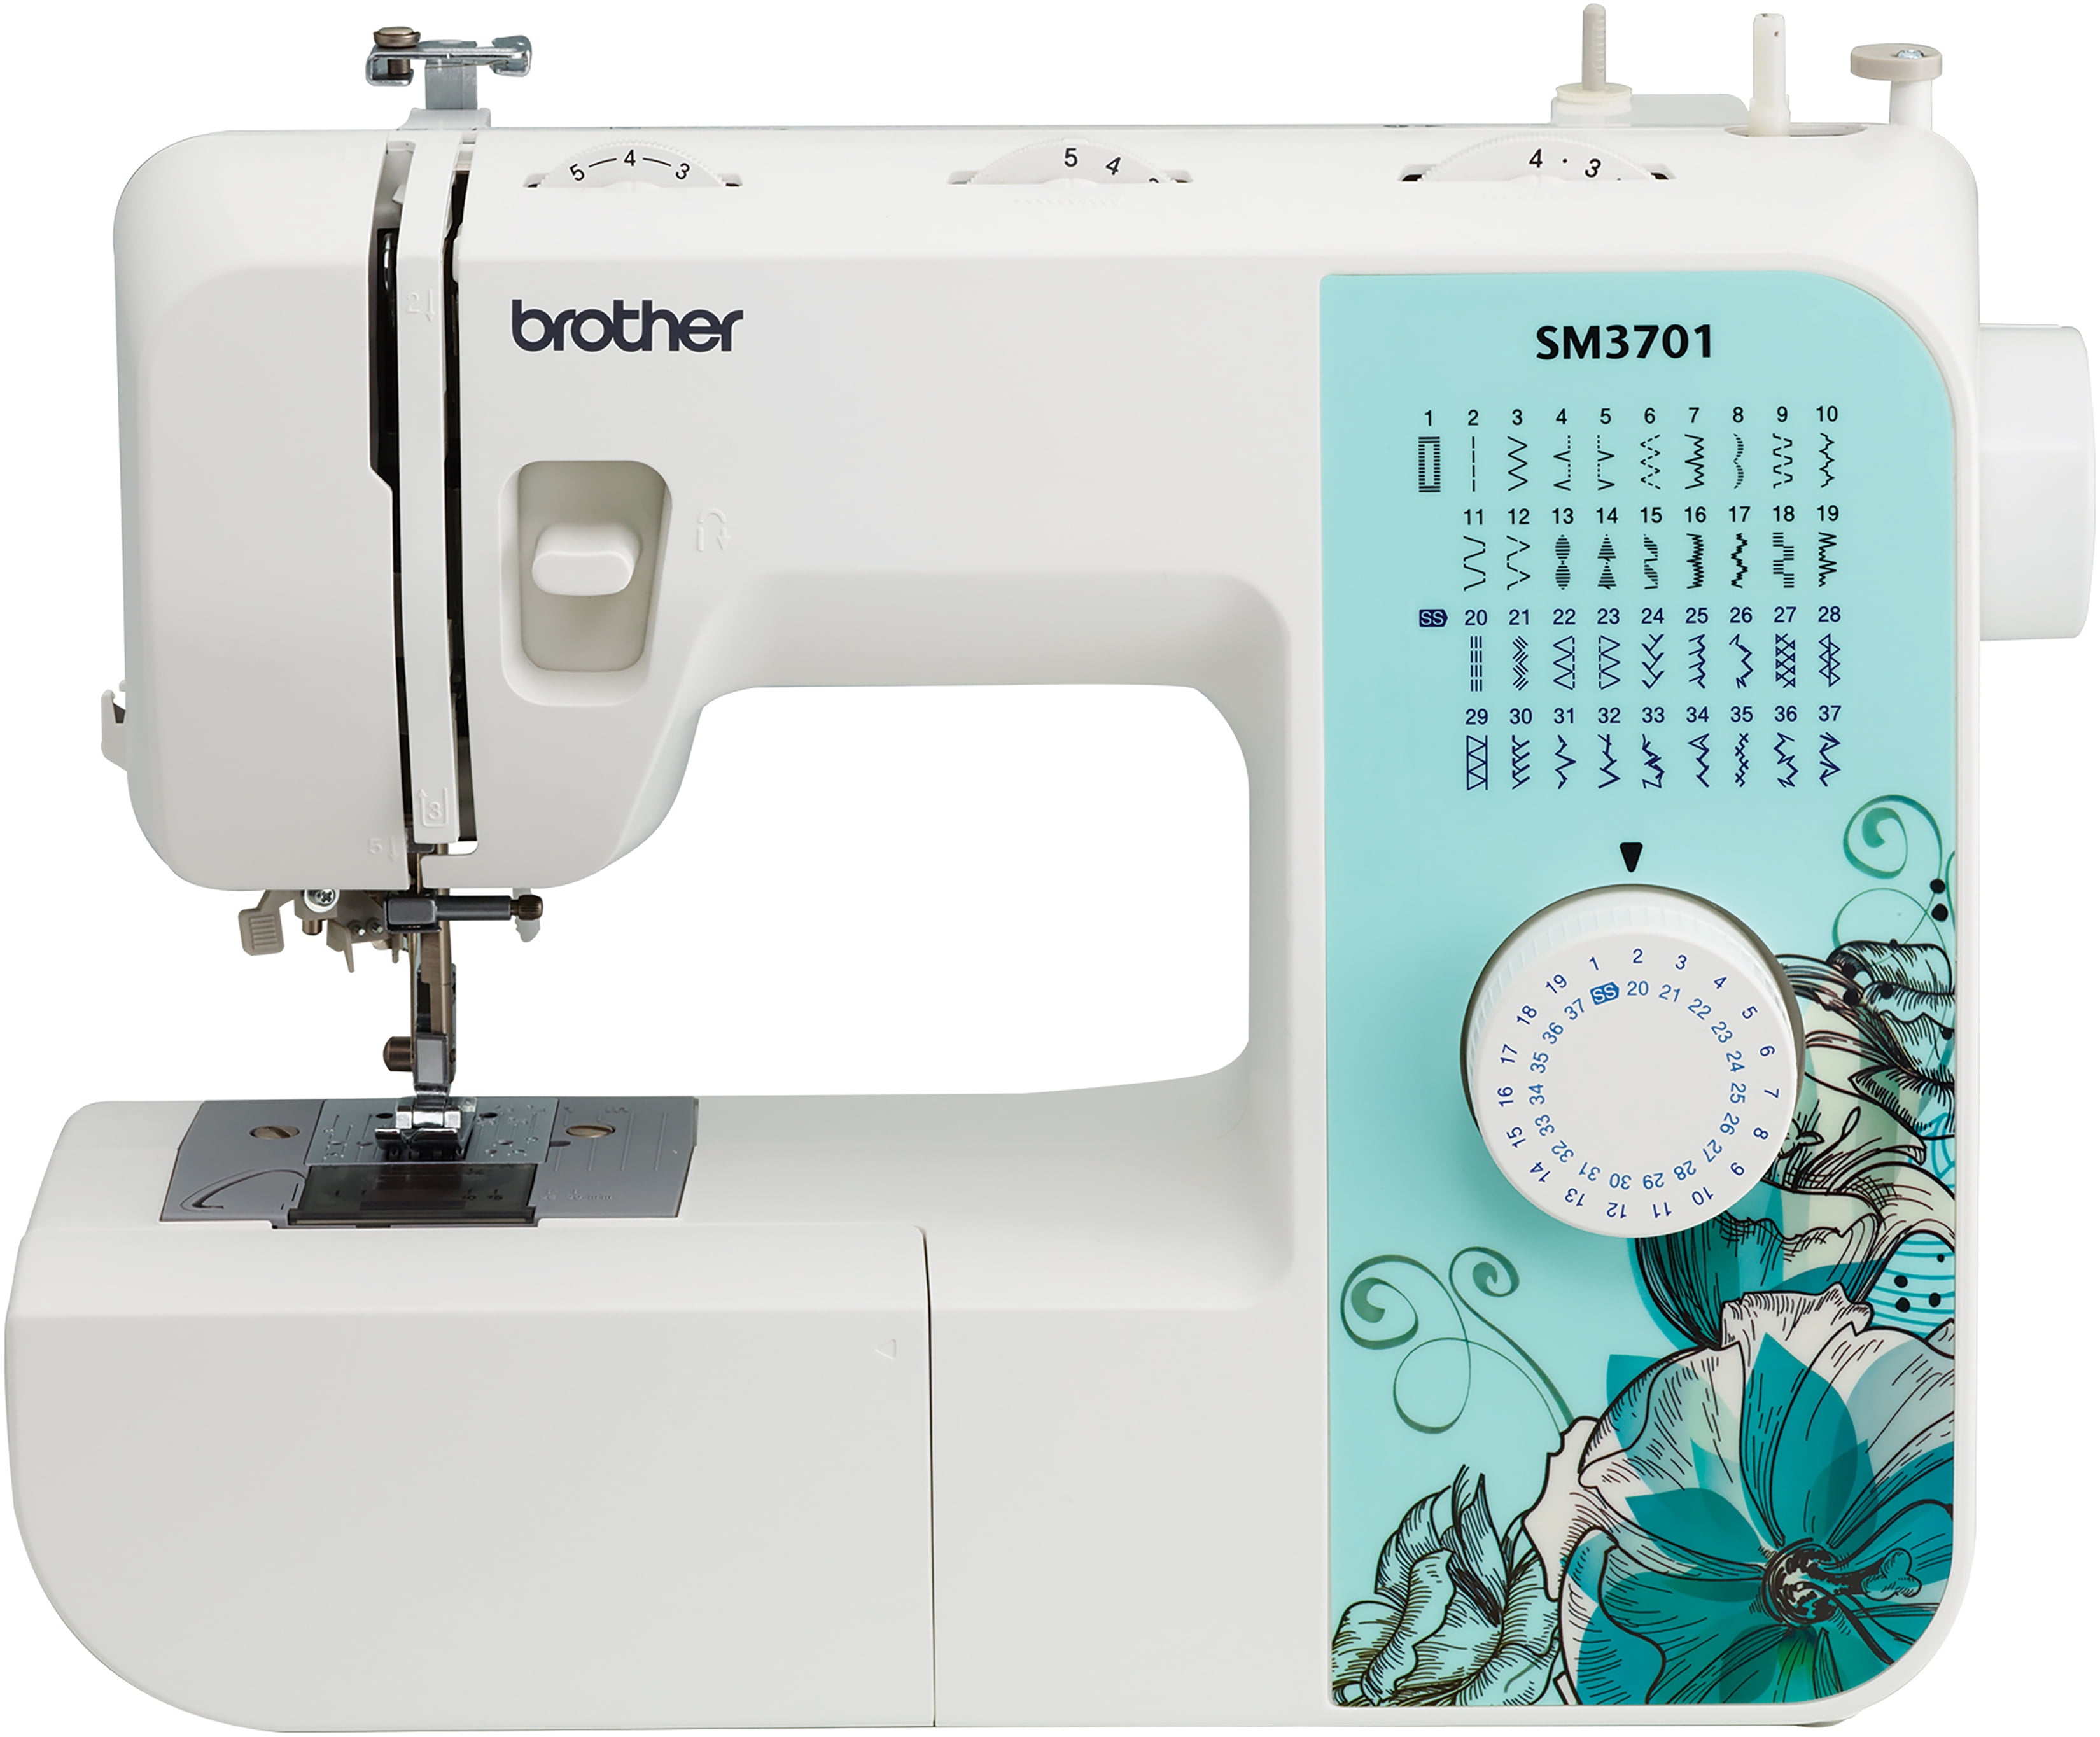 Brother XM2701 Sewing Machine Review 